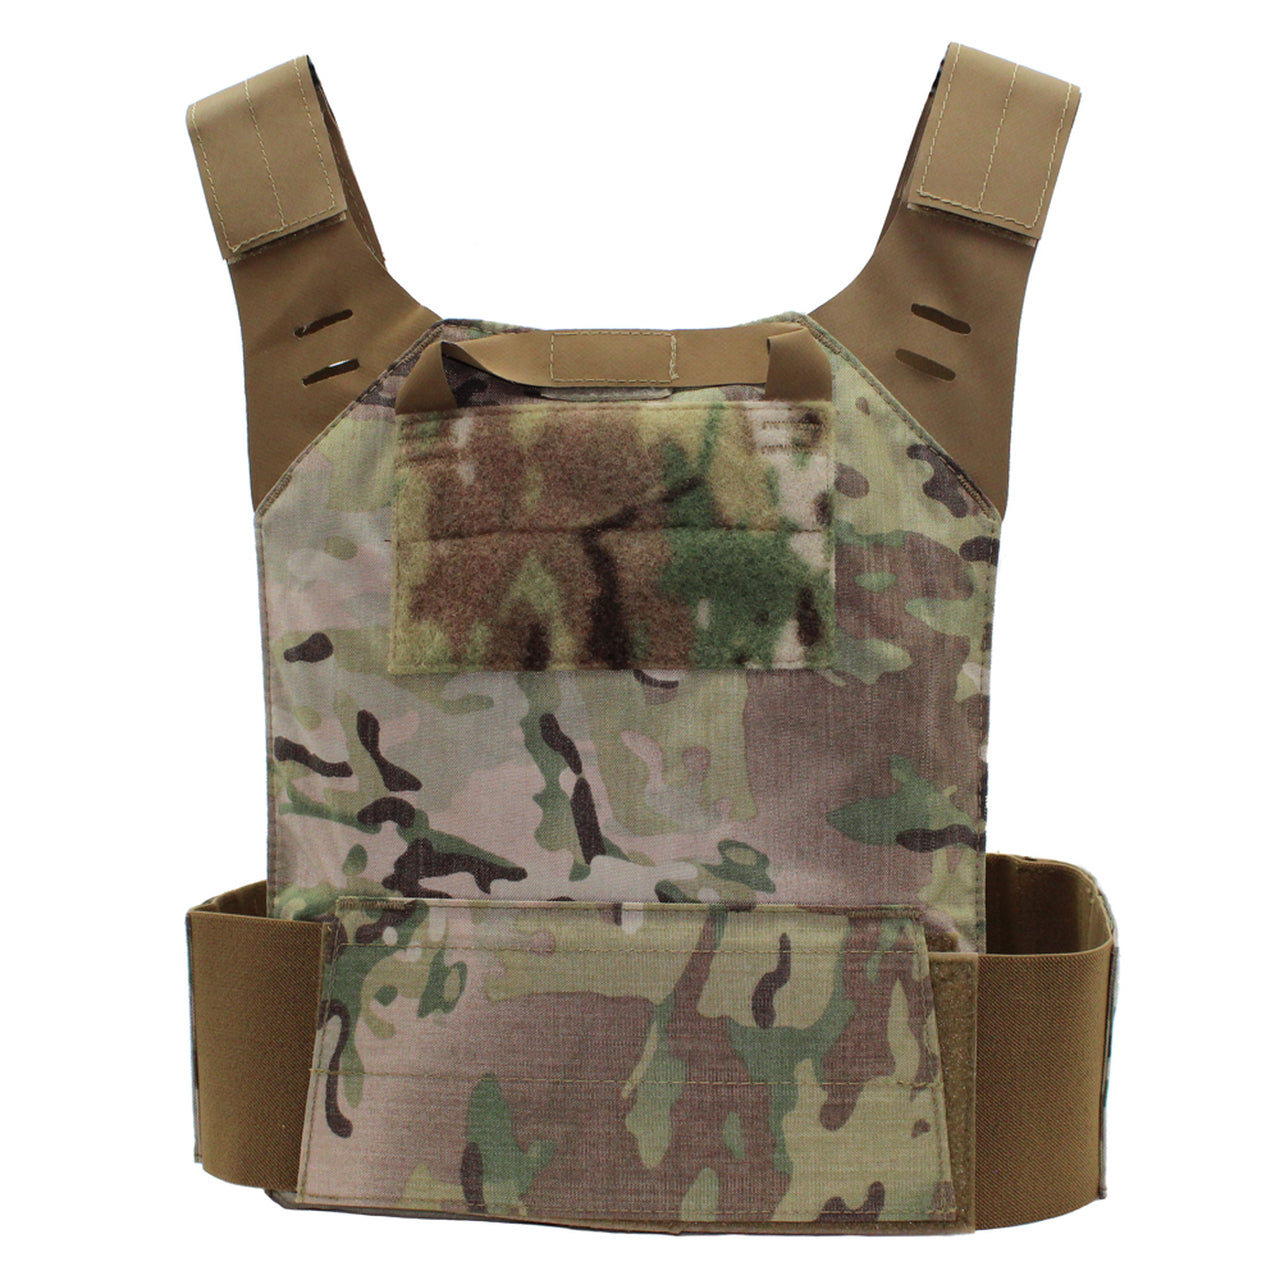 A Shellback Tactical Stealth Low Vis Plate Carrier on a white background.